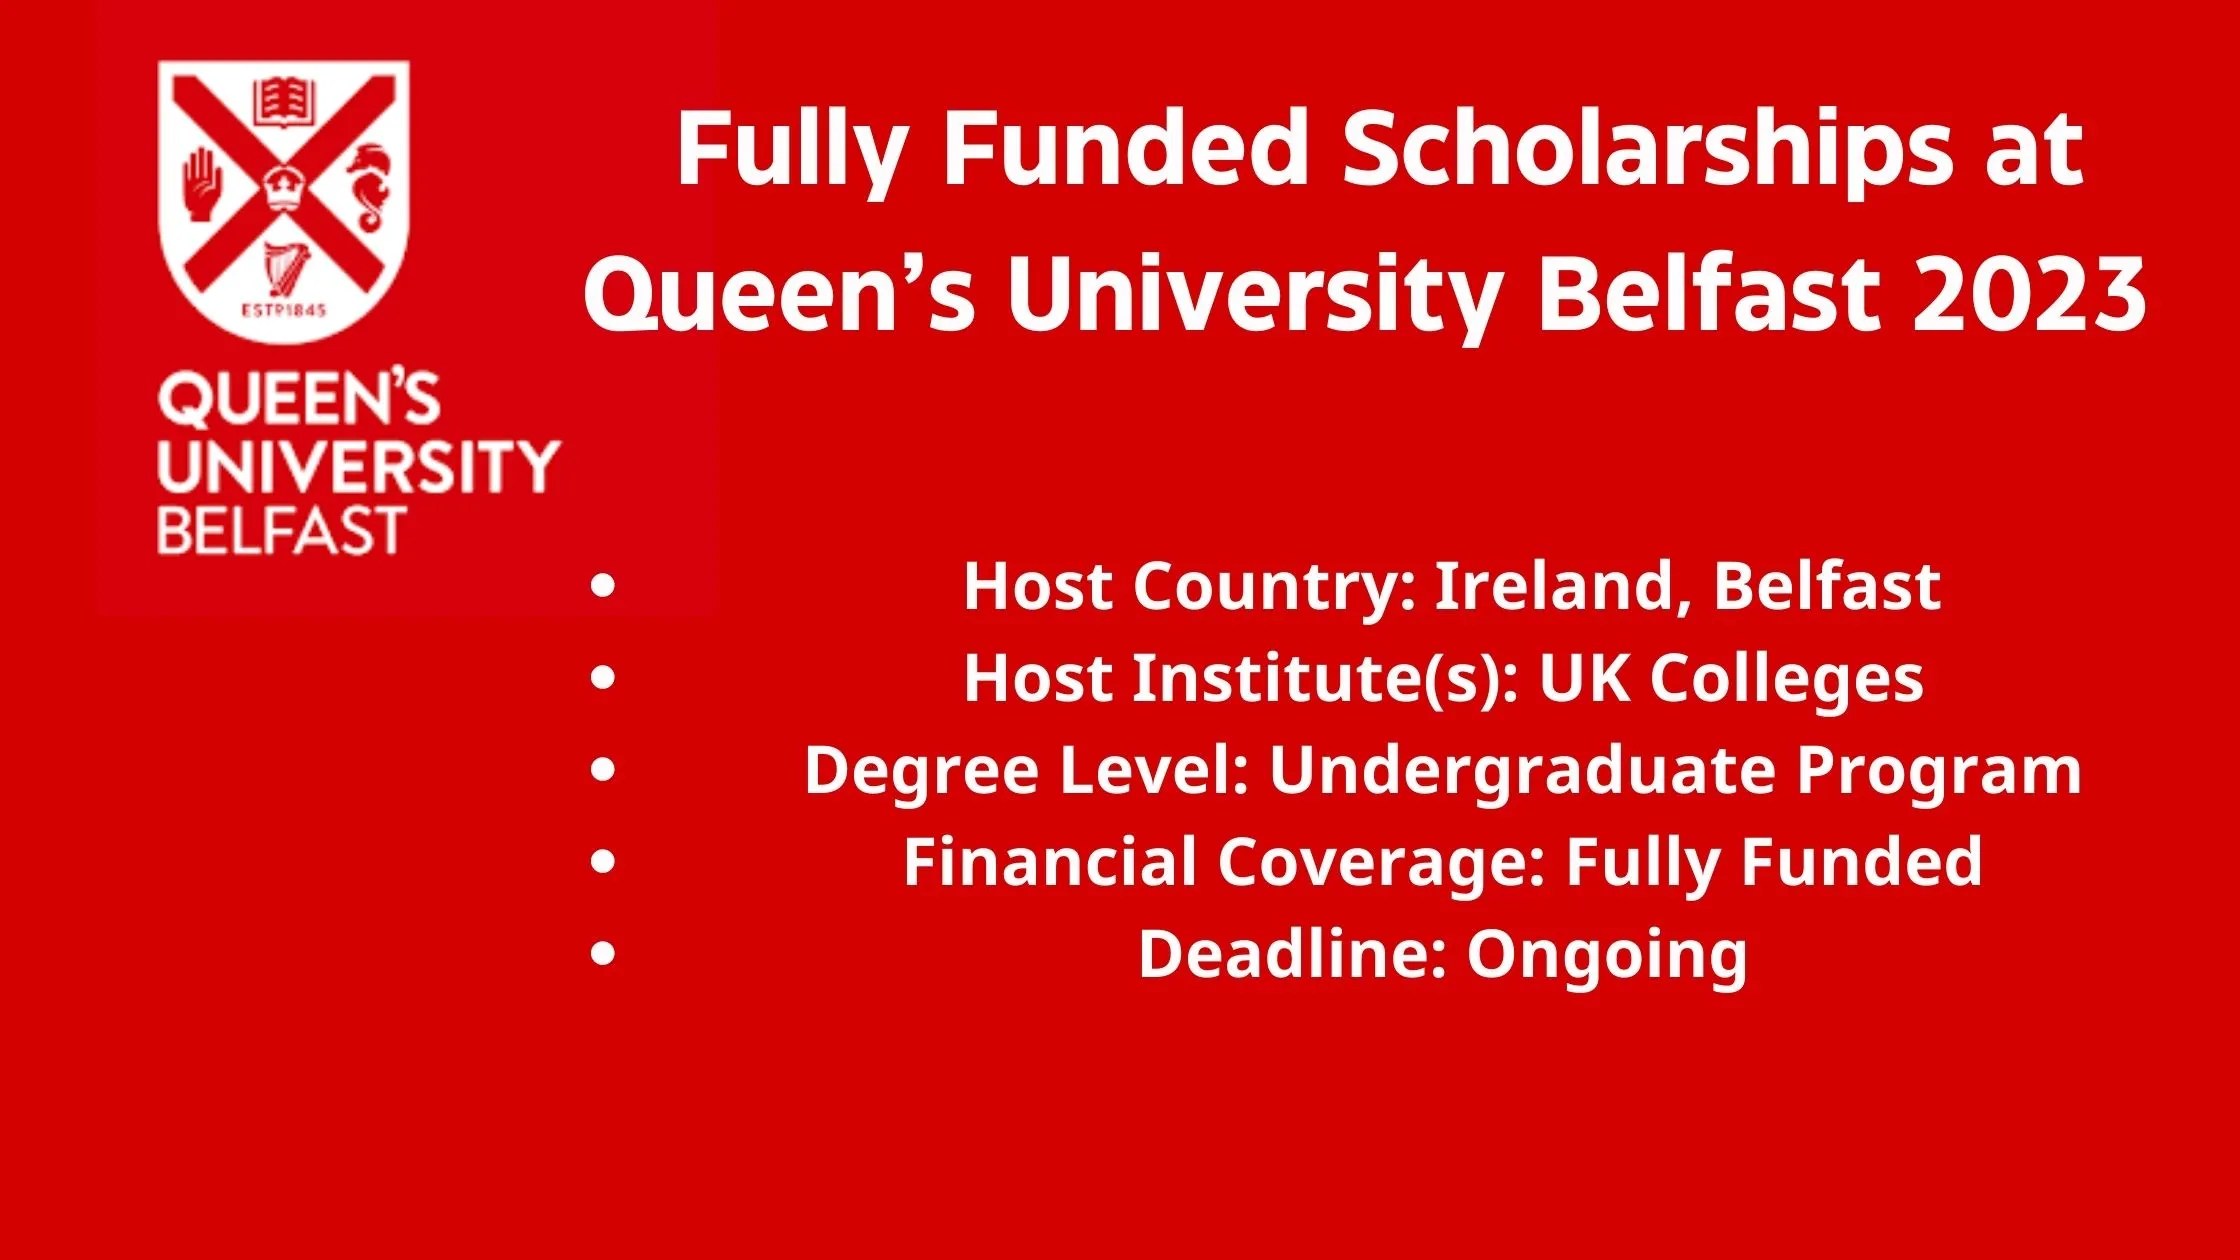 Fully Funded Scholarships at Queen’s University Belfast 2023